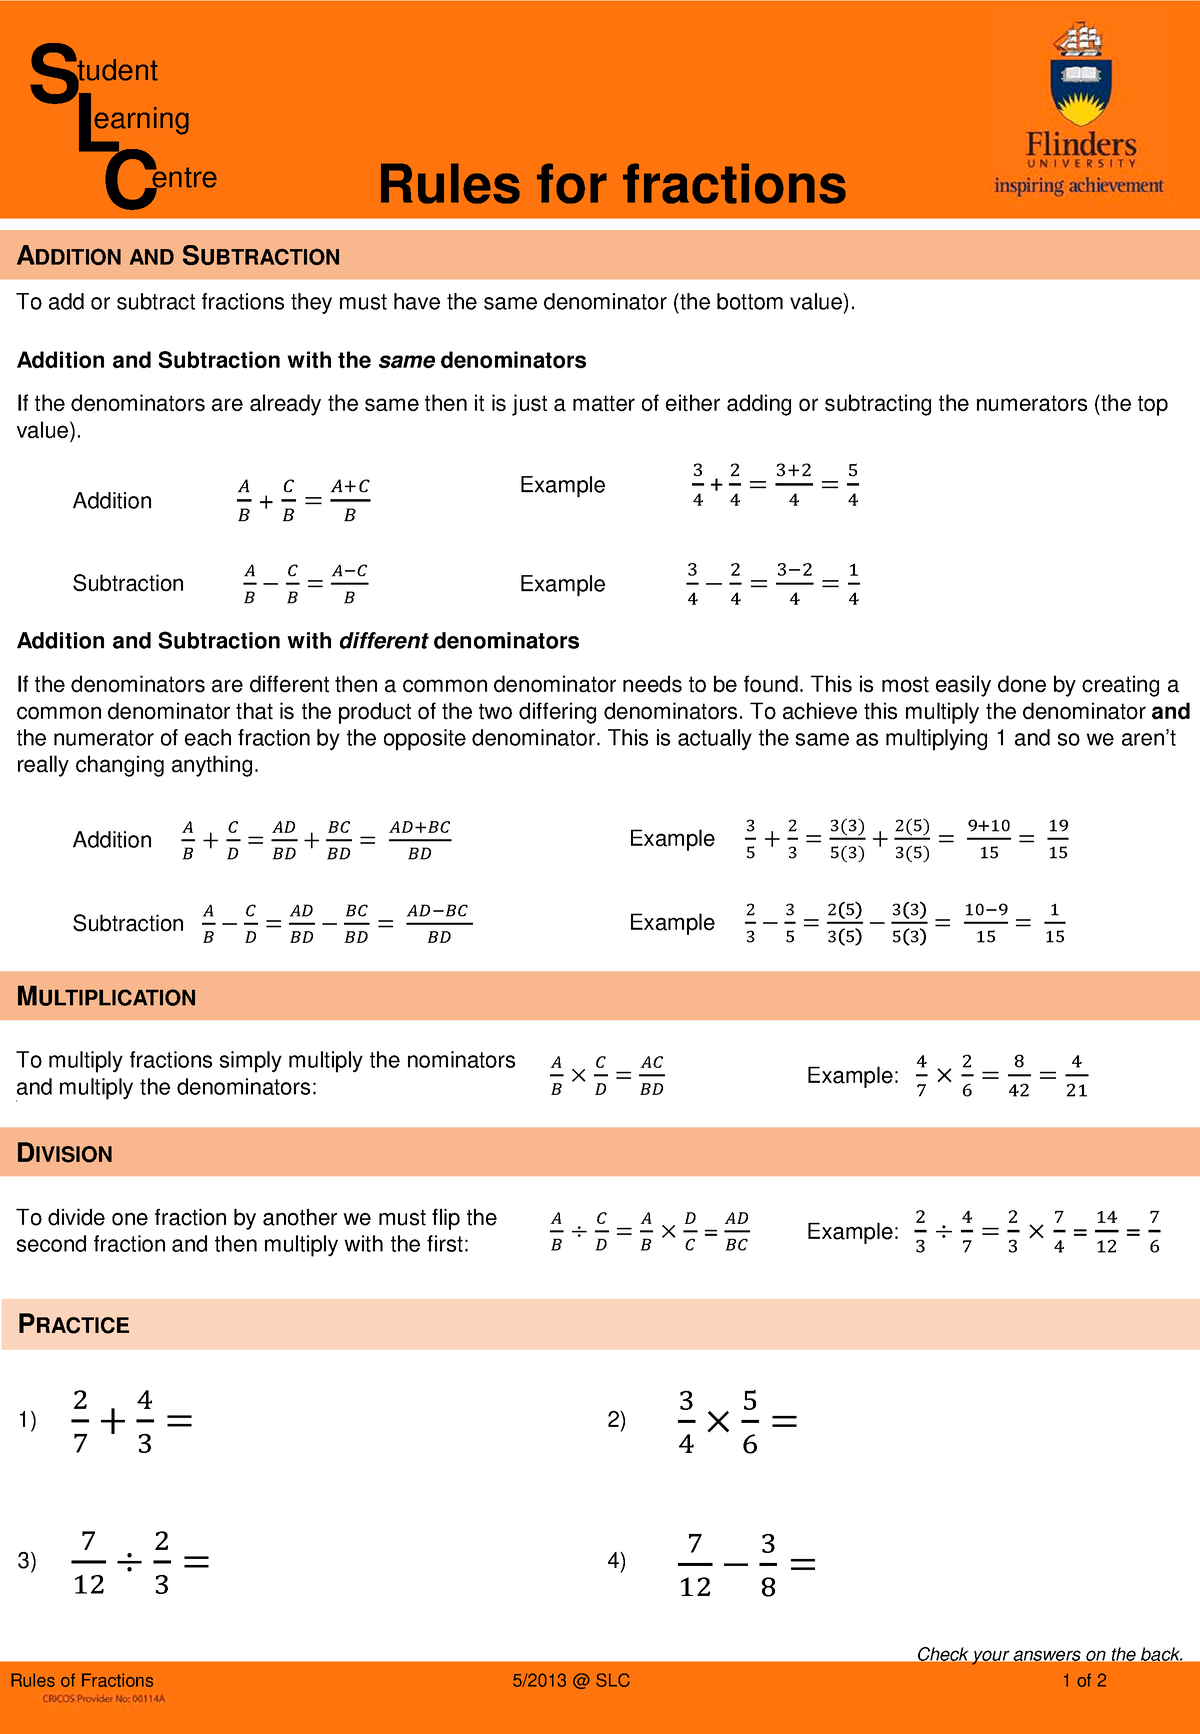 rules-for-fractions-fraction-summary-rules-for-fractions-tudent-c